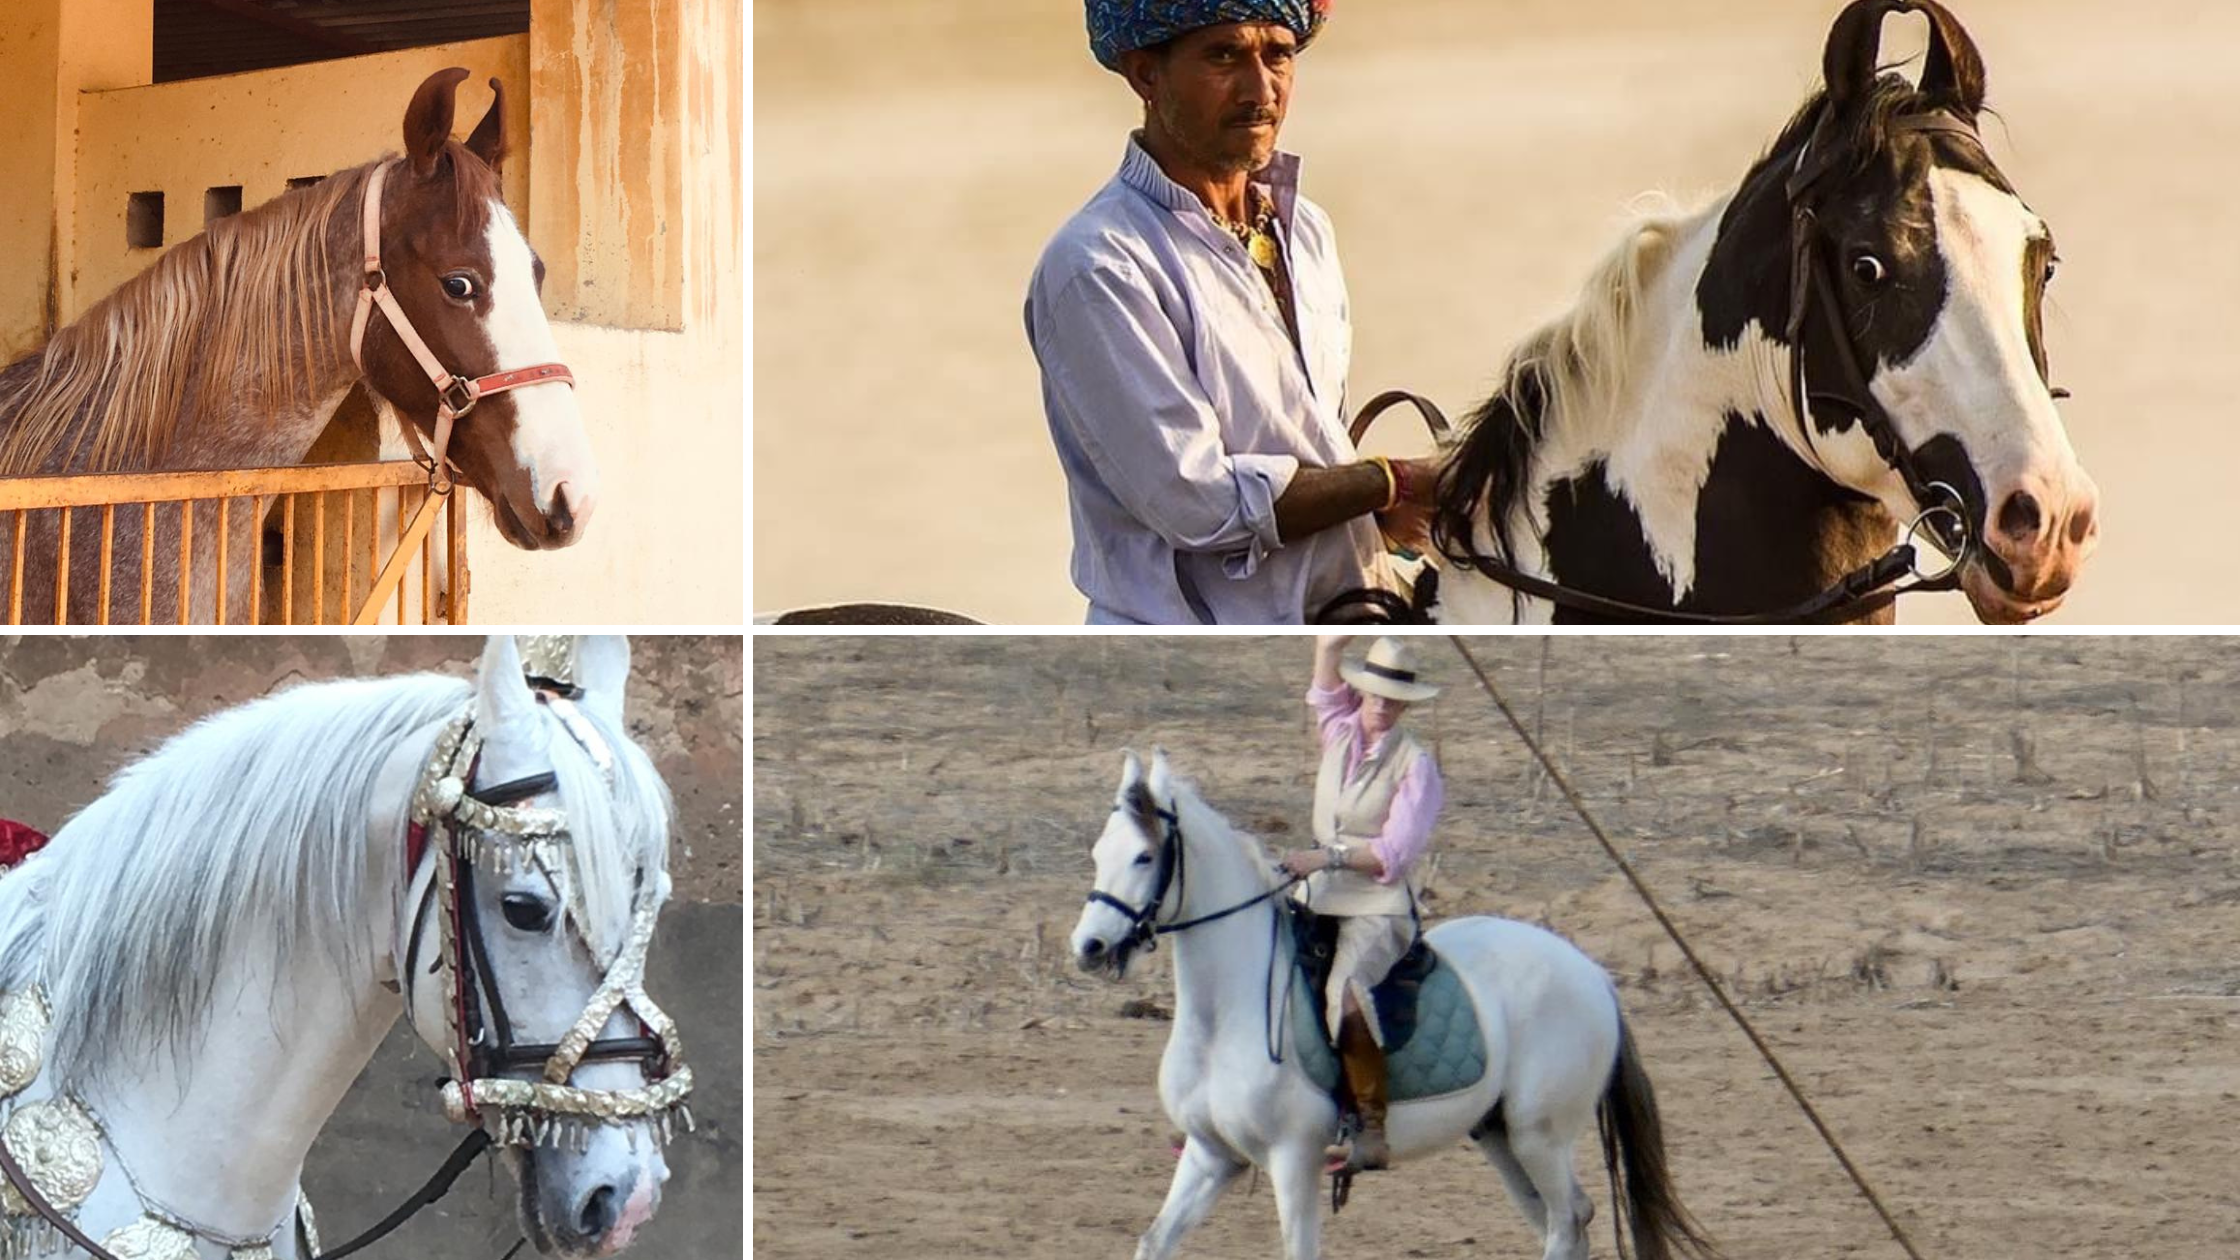 The Indigenous Horse Society of India is organizing The Royal Marwari Jaipur Horse Show at Rajasthan Polo Club in Jaipur from March 3 to March 5. Around 150 Marwari horses will participate in this show.